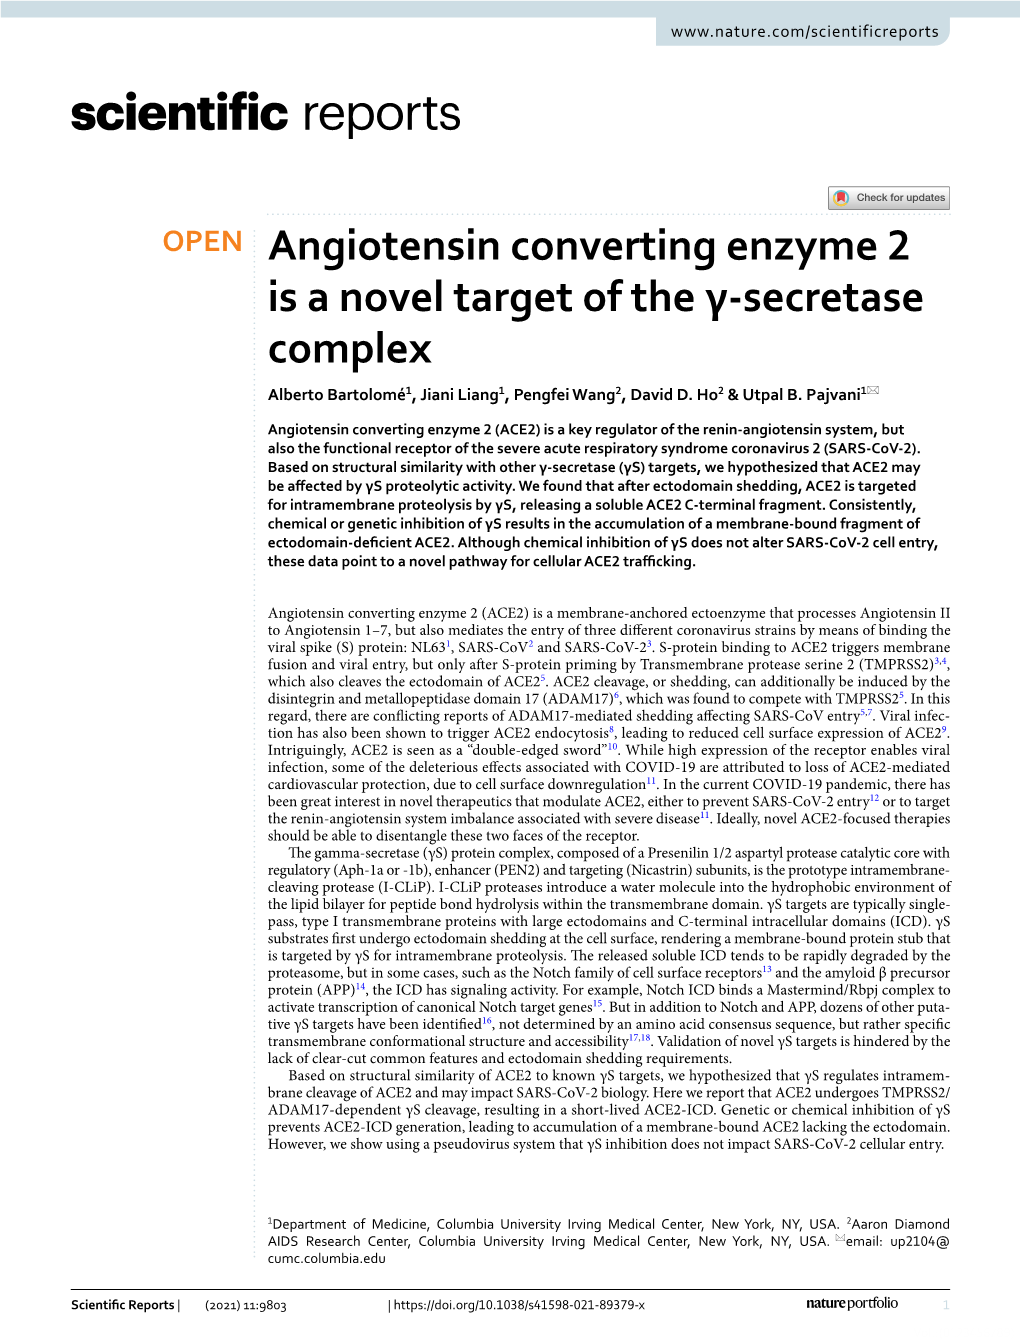 Angiotensin Converting Enzyme 2 Is a Novel Target of the Γ-Secretase